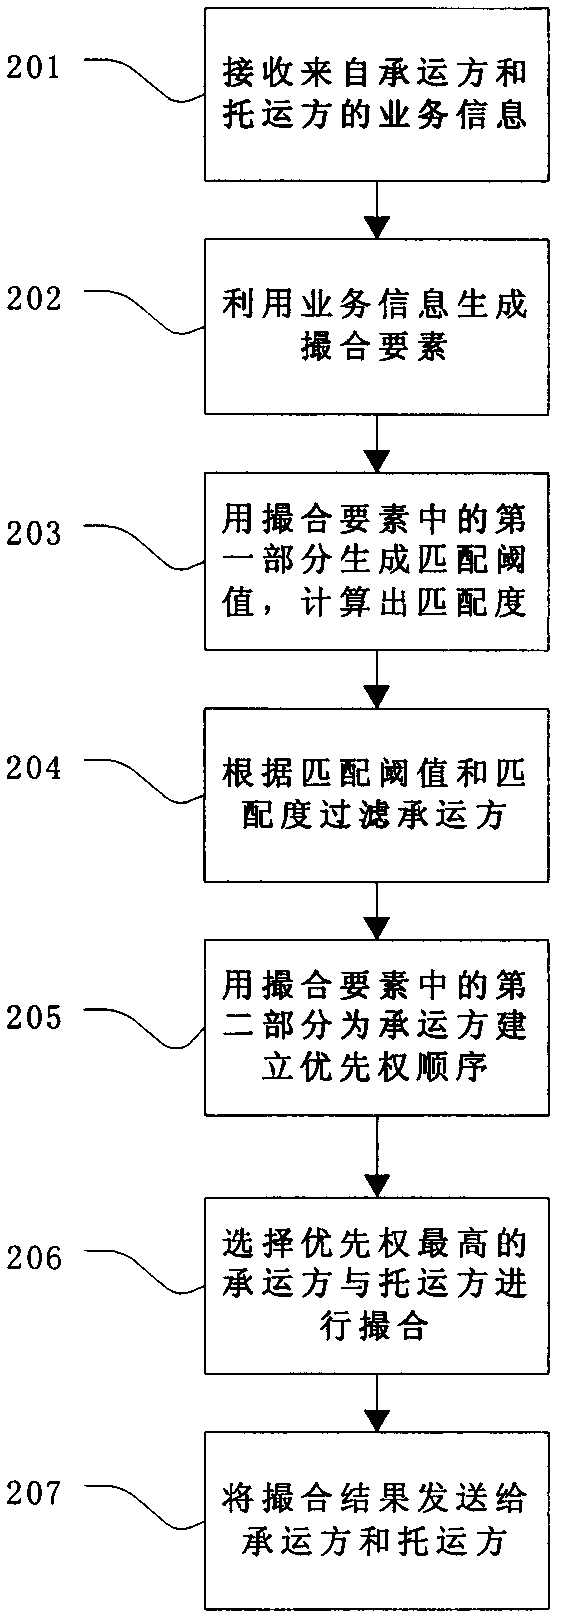 Method and system for matching freight transaction